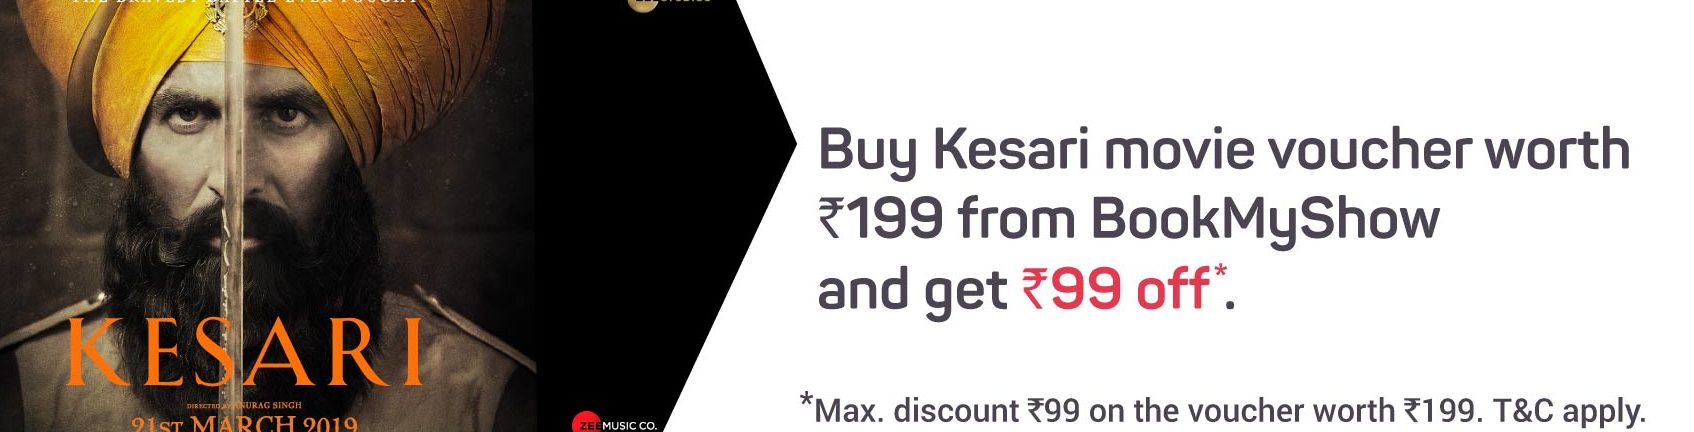 Bookmyshow Offer - Pay Rs.100 to Get a Kesari Movie Voucher Worth Rs.199